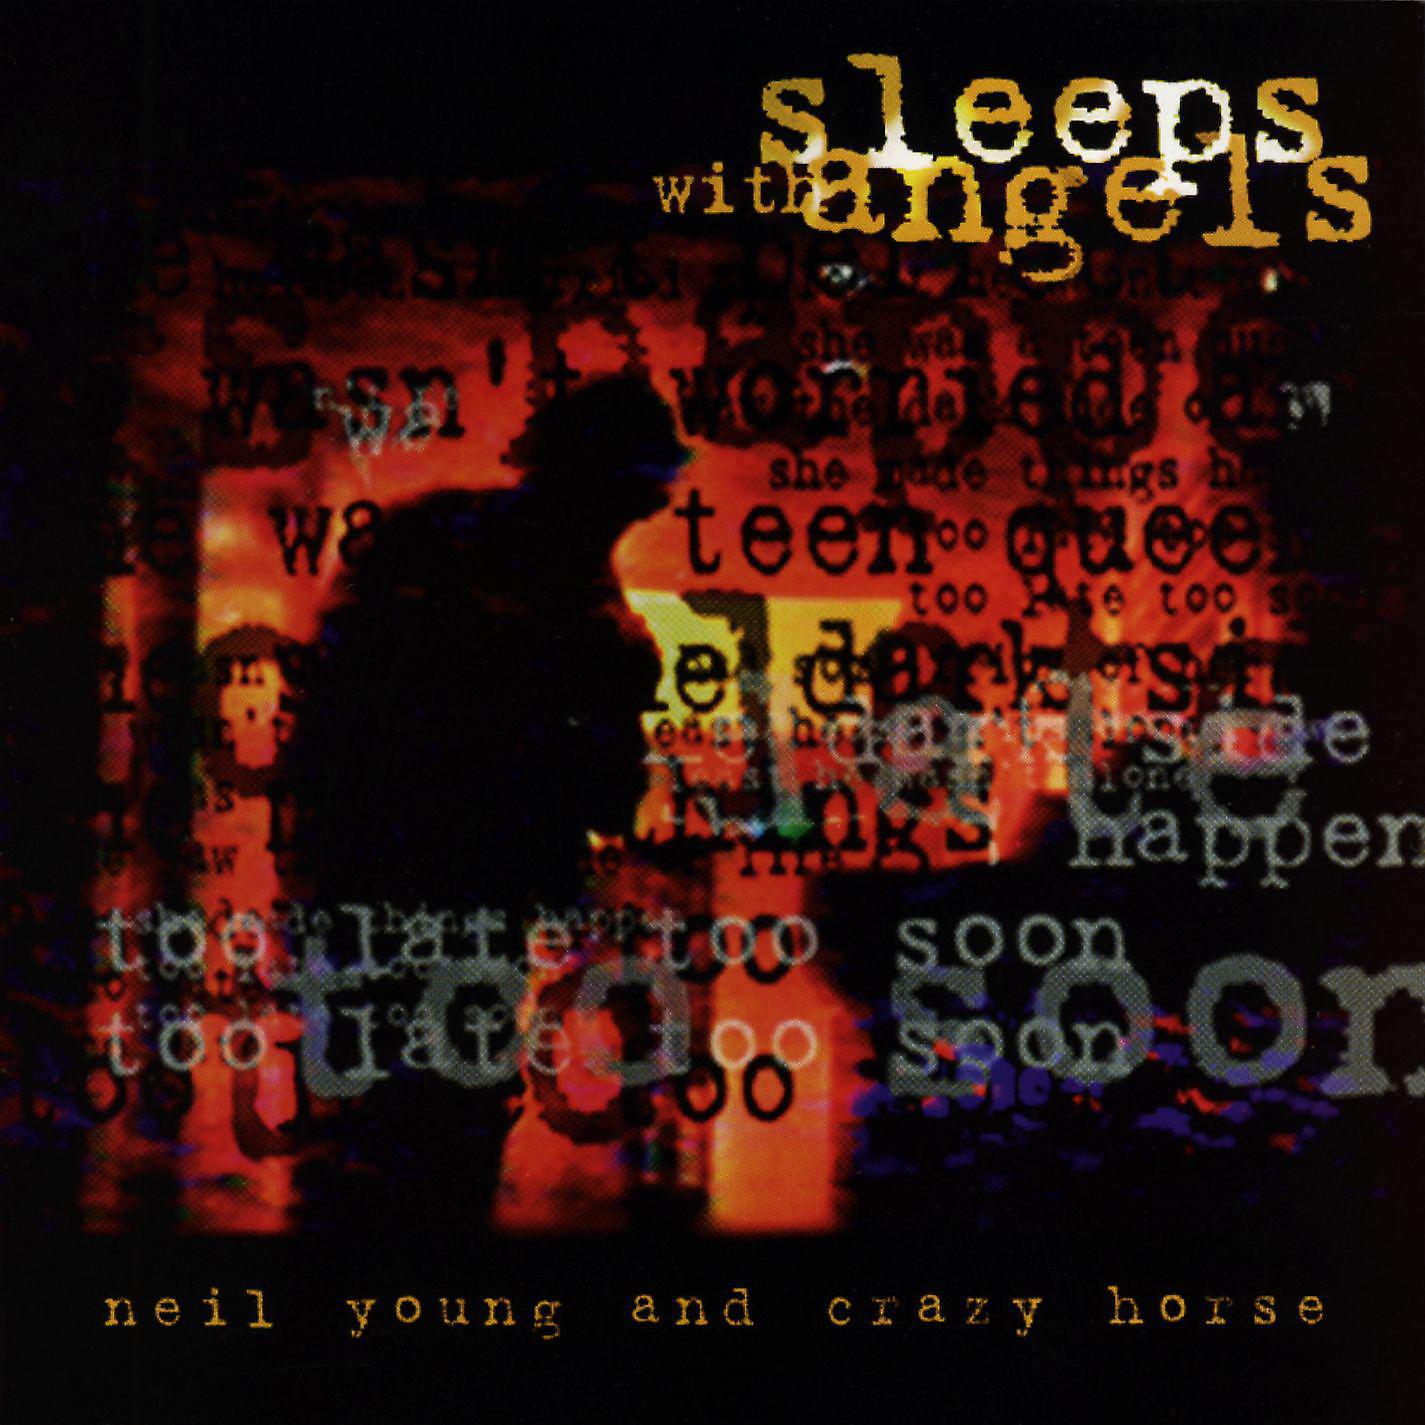 Neil young and crazy horse rust never sleeps фото 84